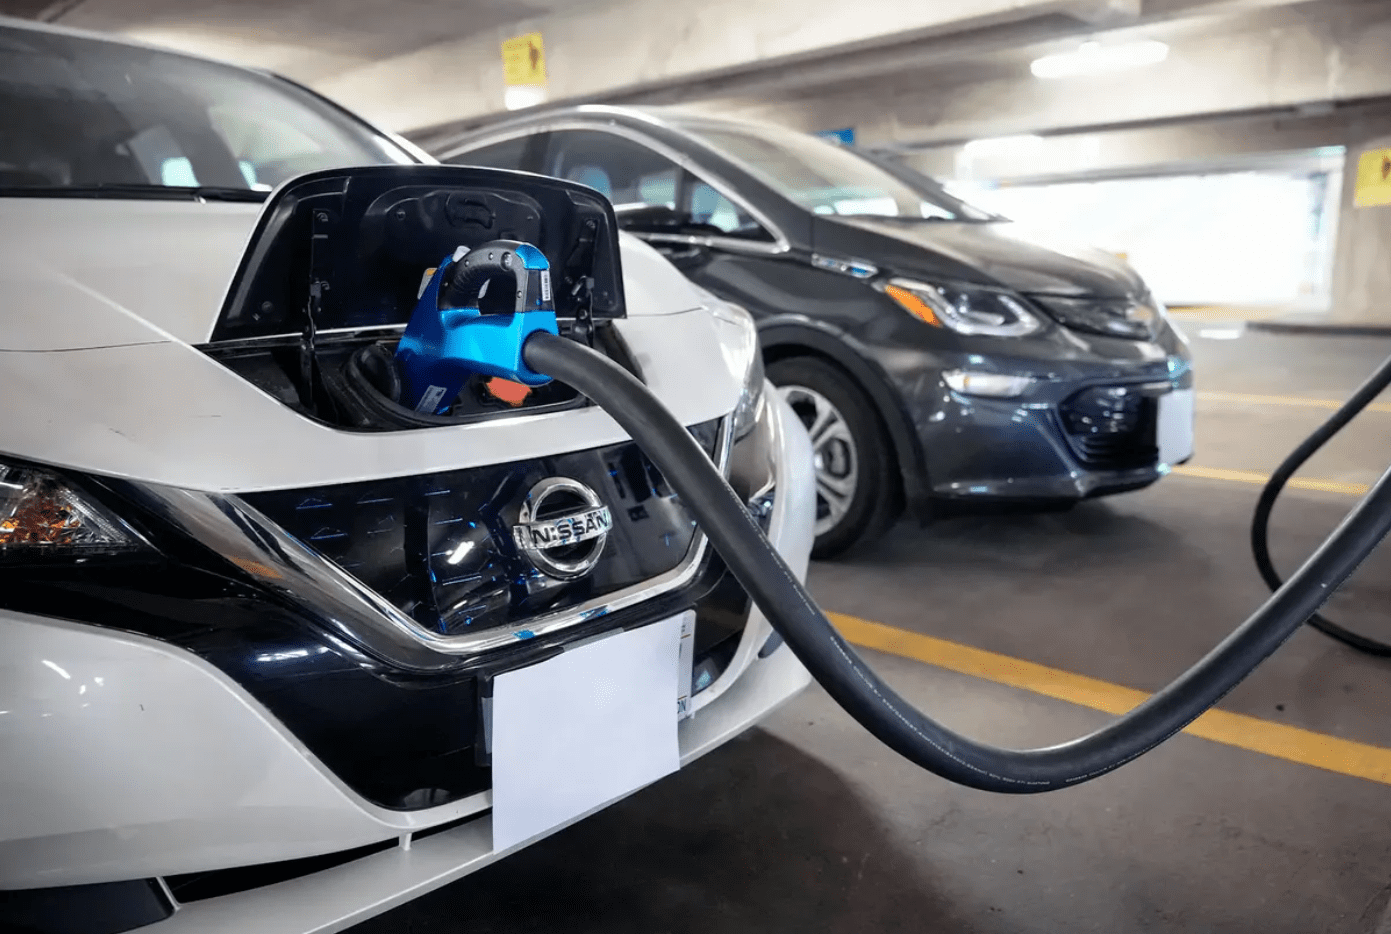 What's Next For The Electric Car Market?